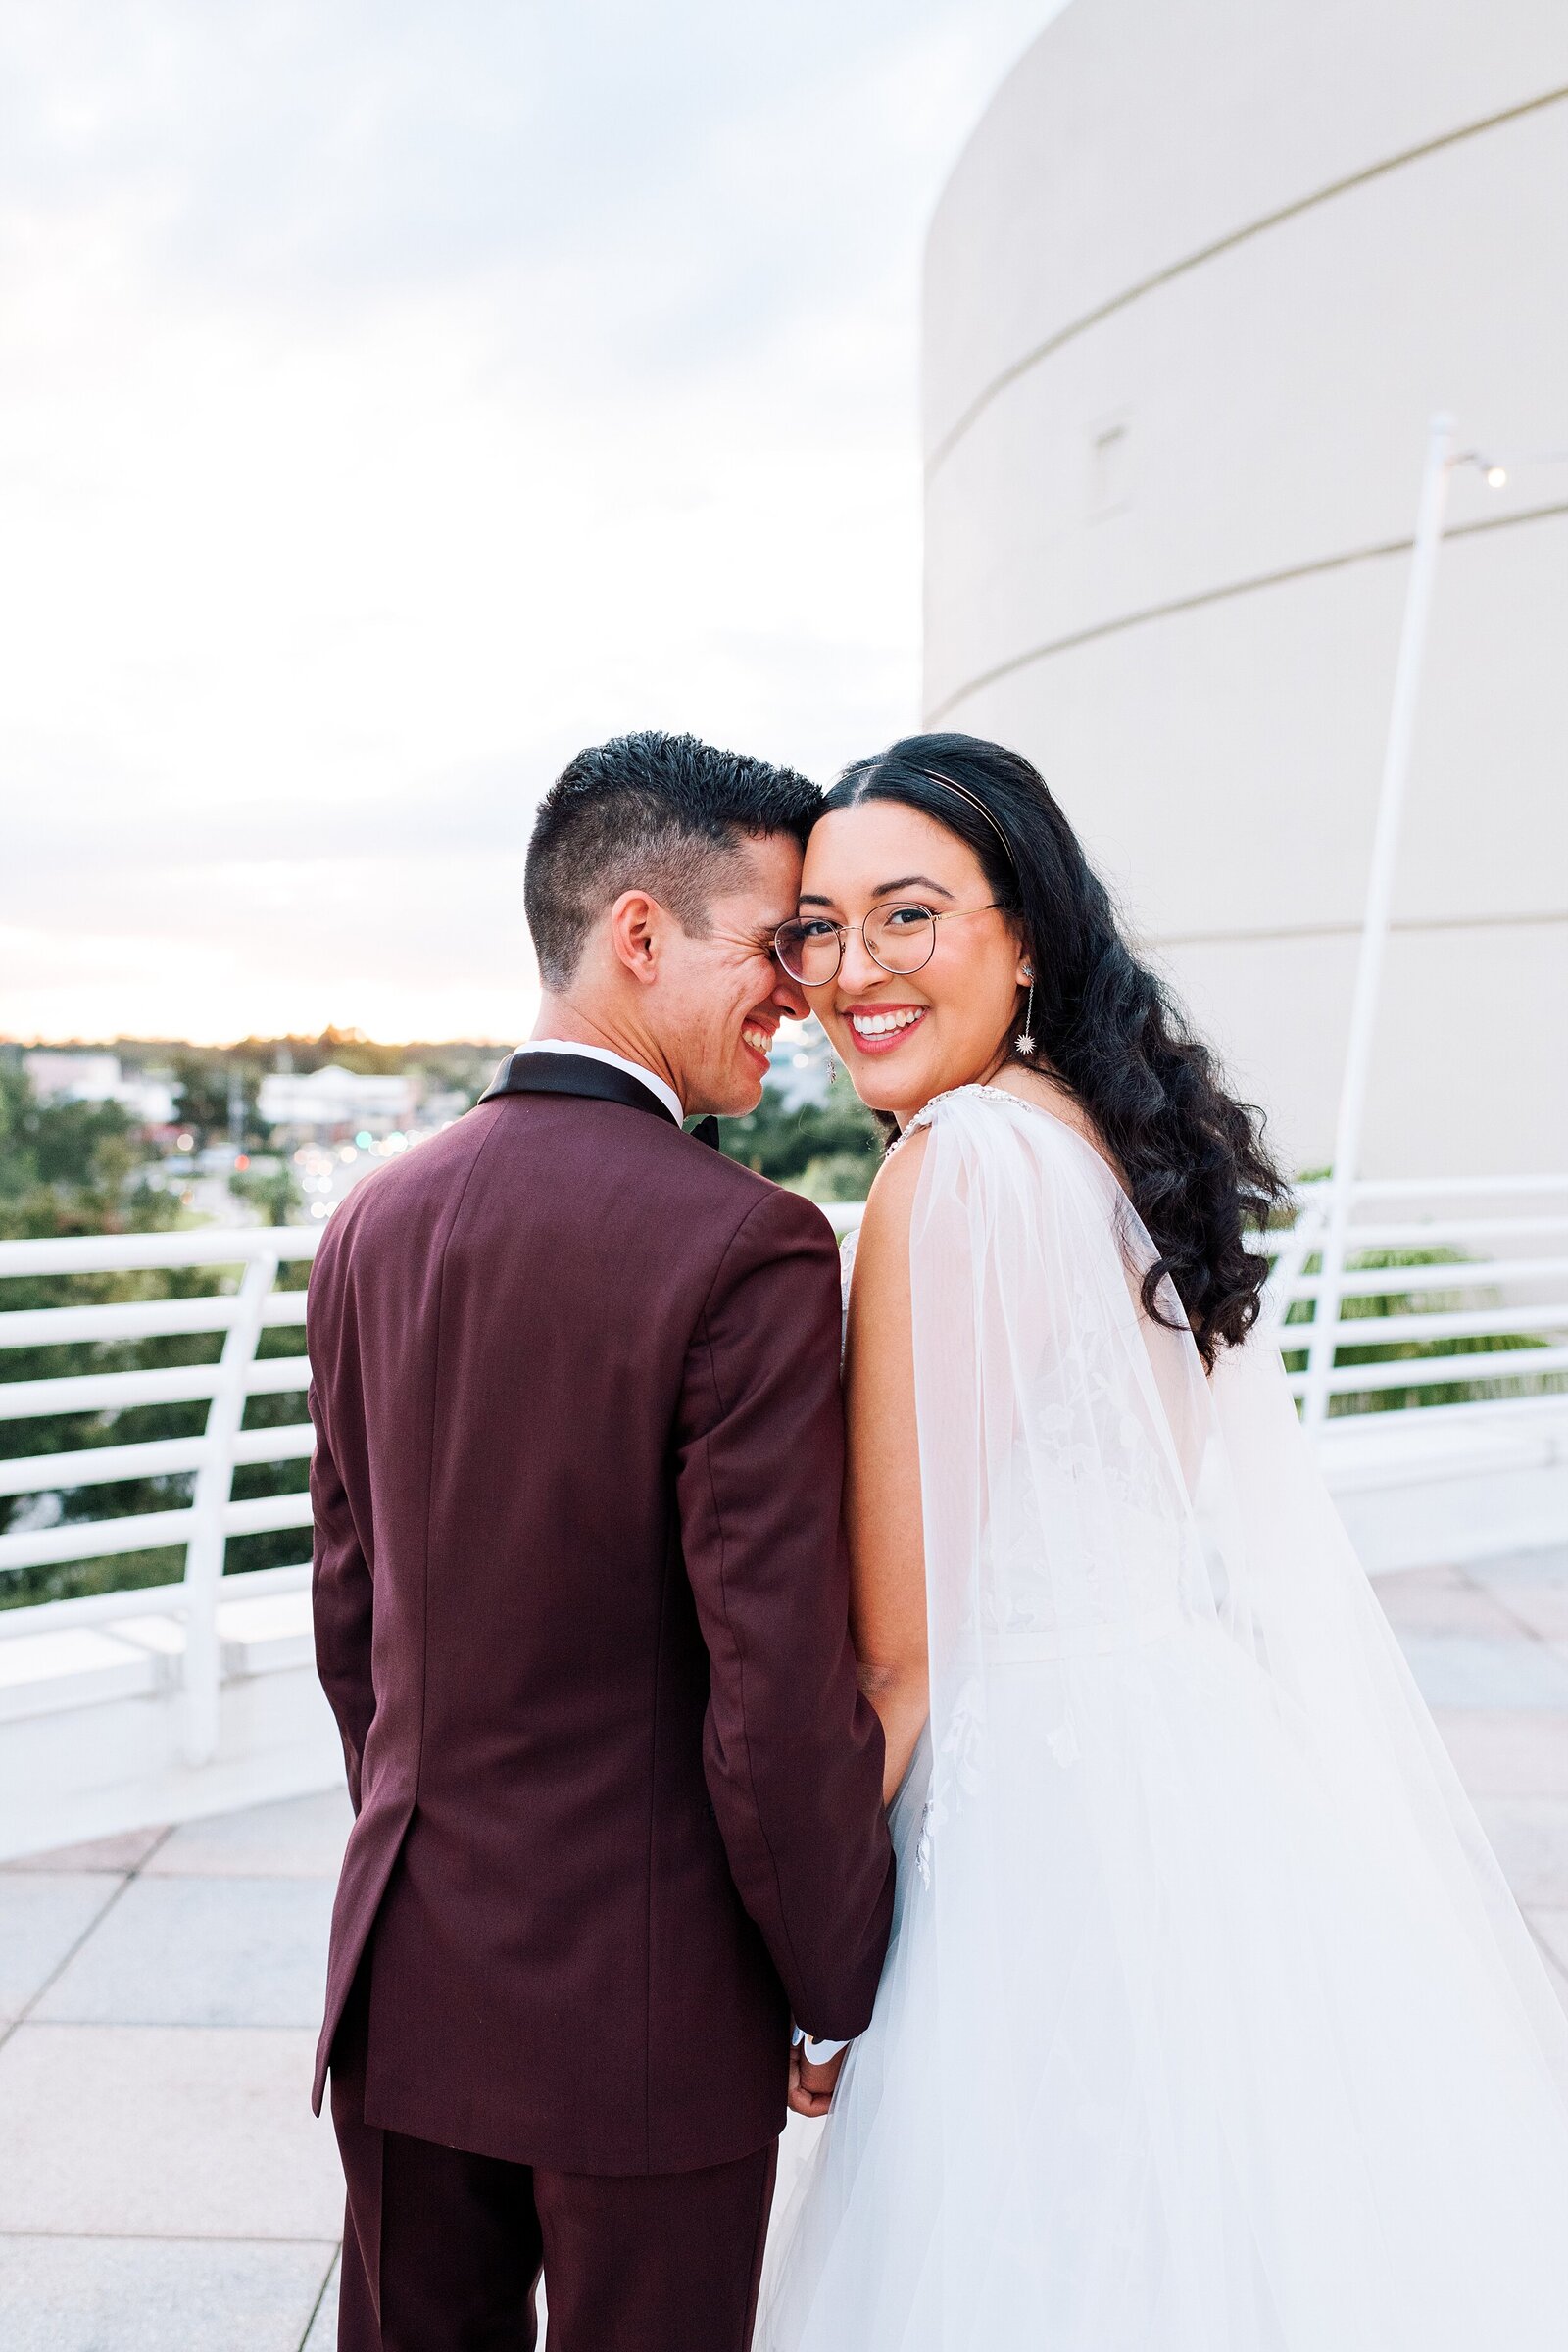 Bride and Groom on their wedding day | Orlando Science Center Wedding | Chynna Pacheco Photography